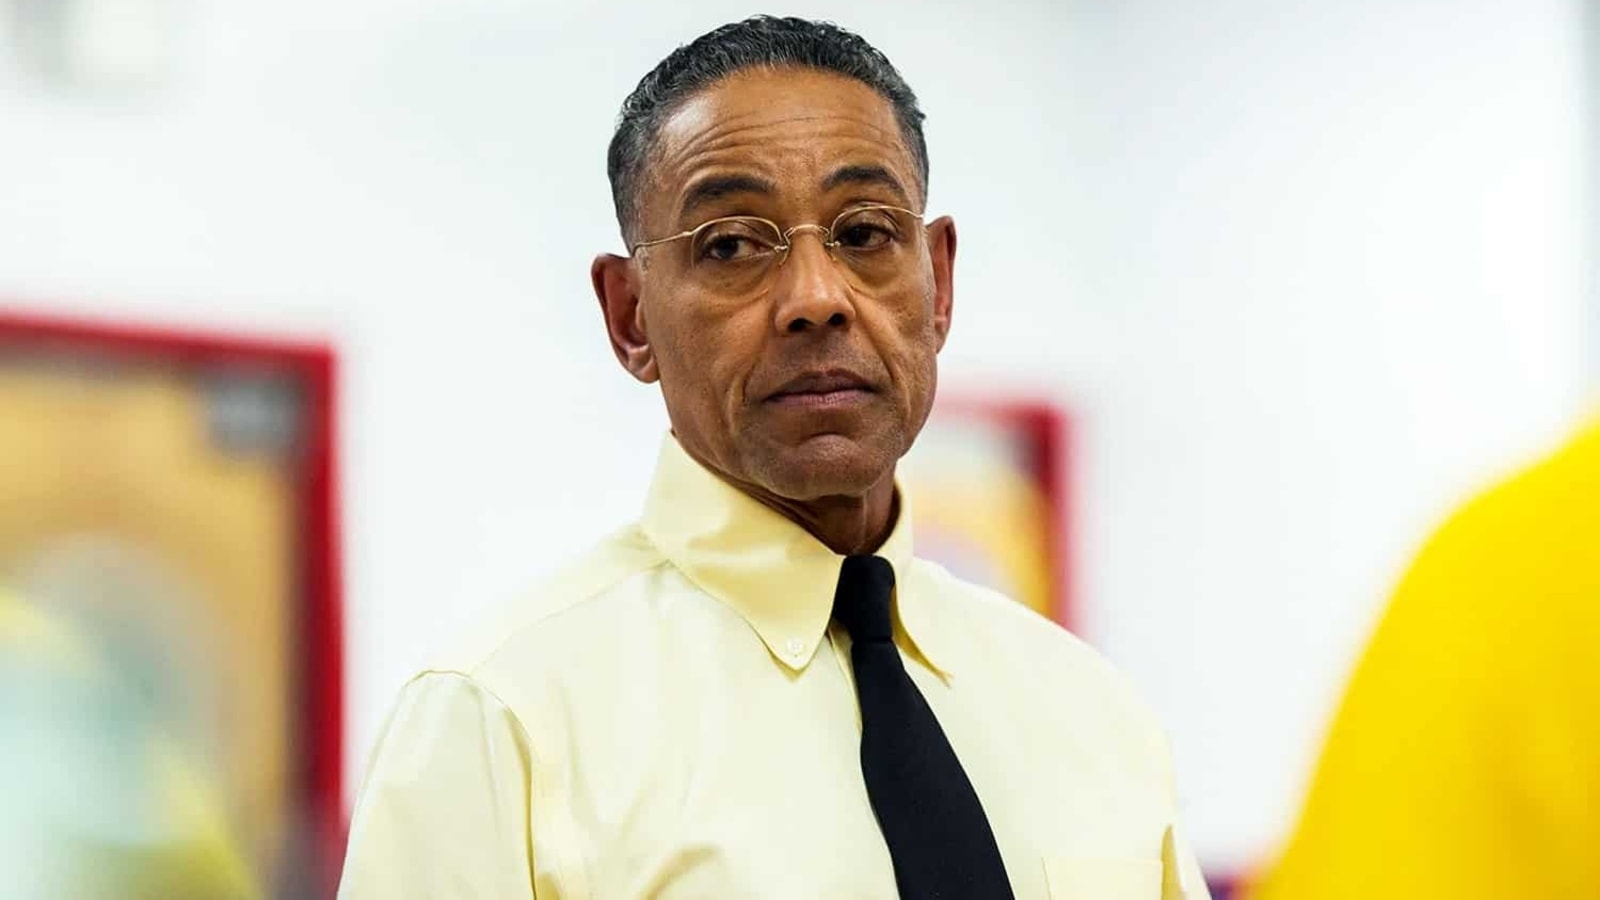 Giancarlo Esposito seemingly confirms he’s enjoying X Males’s Professor X in Marvel Cinematic Universe